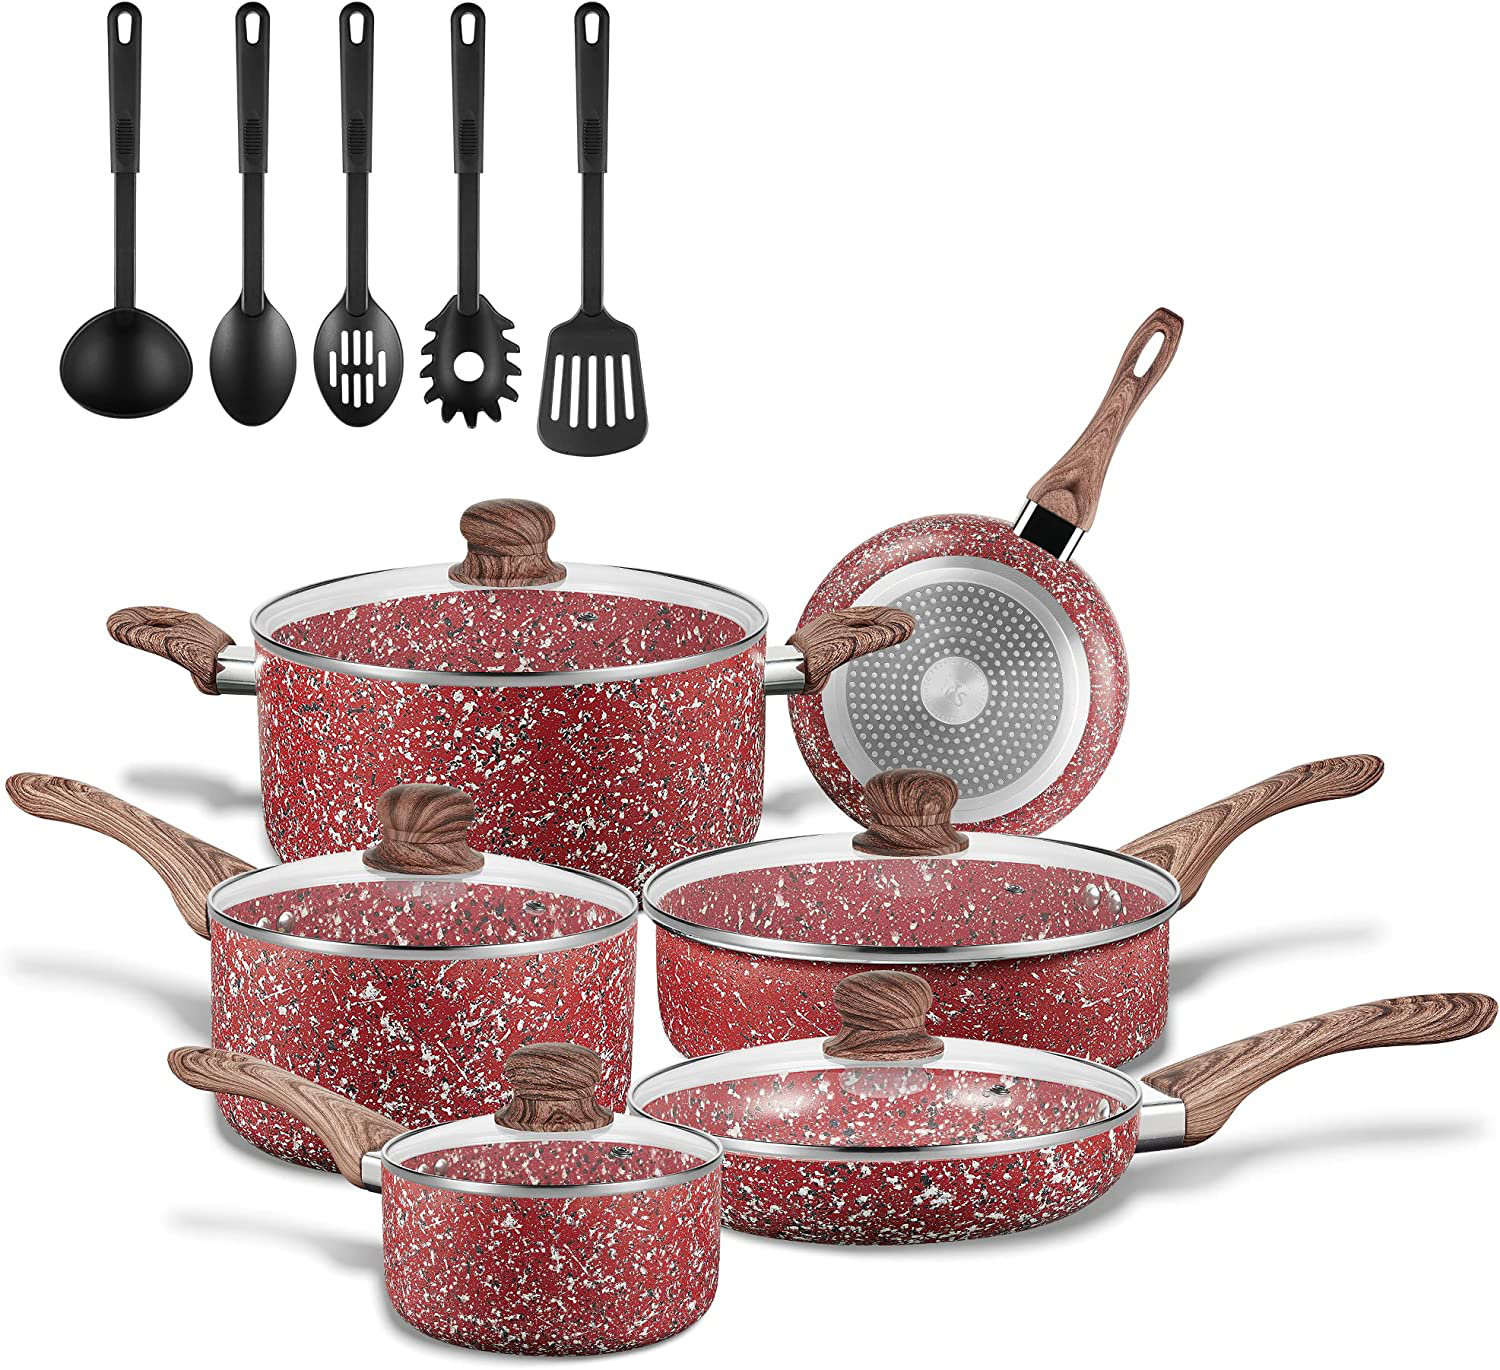 Nutrichef 15 Piece Nonstick Kitchen Cookware Set with 2 Cooking Pots, 2  Sauce Pots, 4 Lids, 2 Pans, and 5 Utensils, Multicolor in 2023